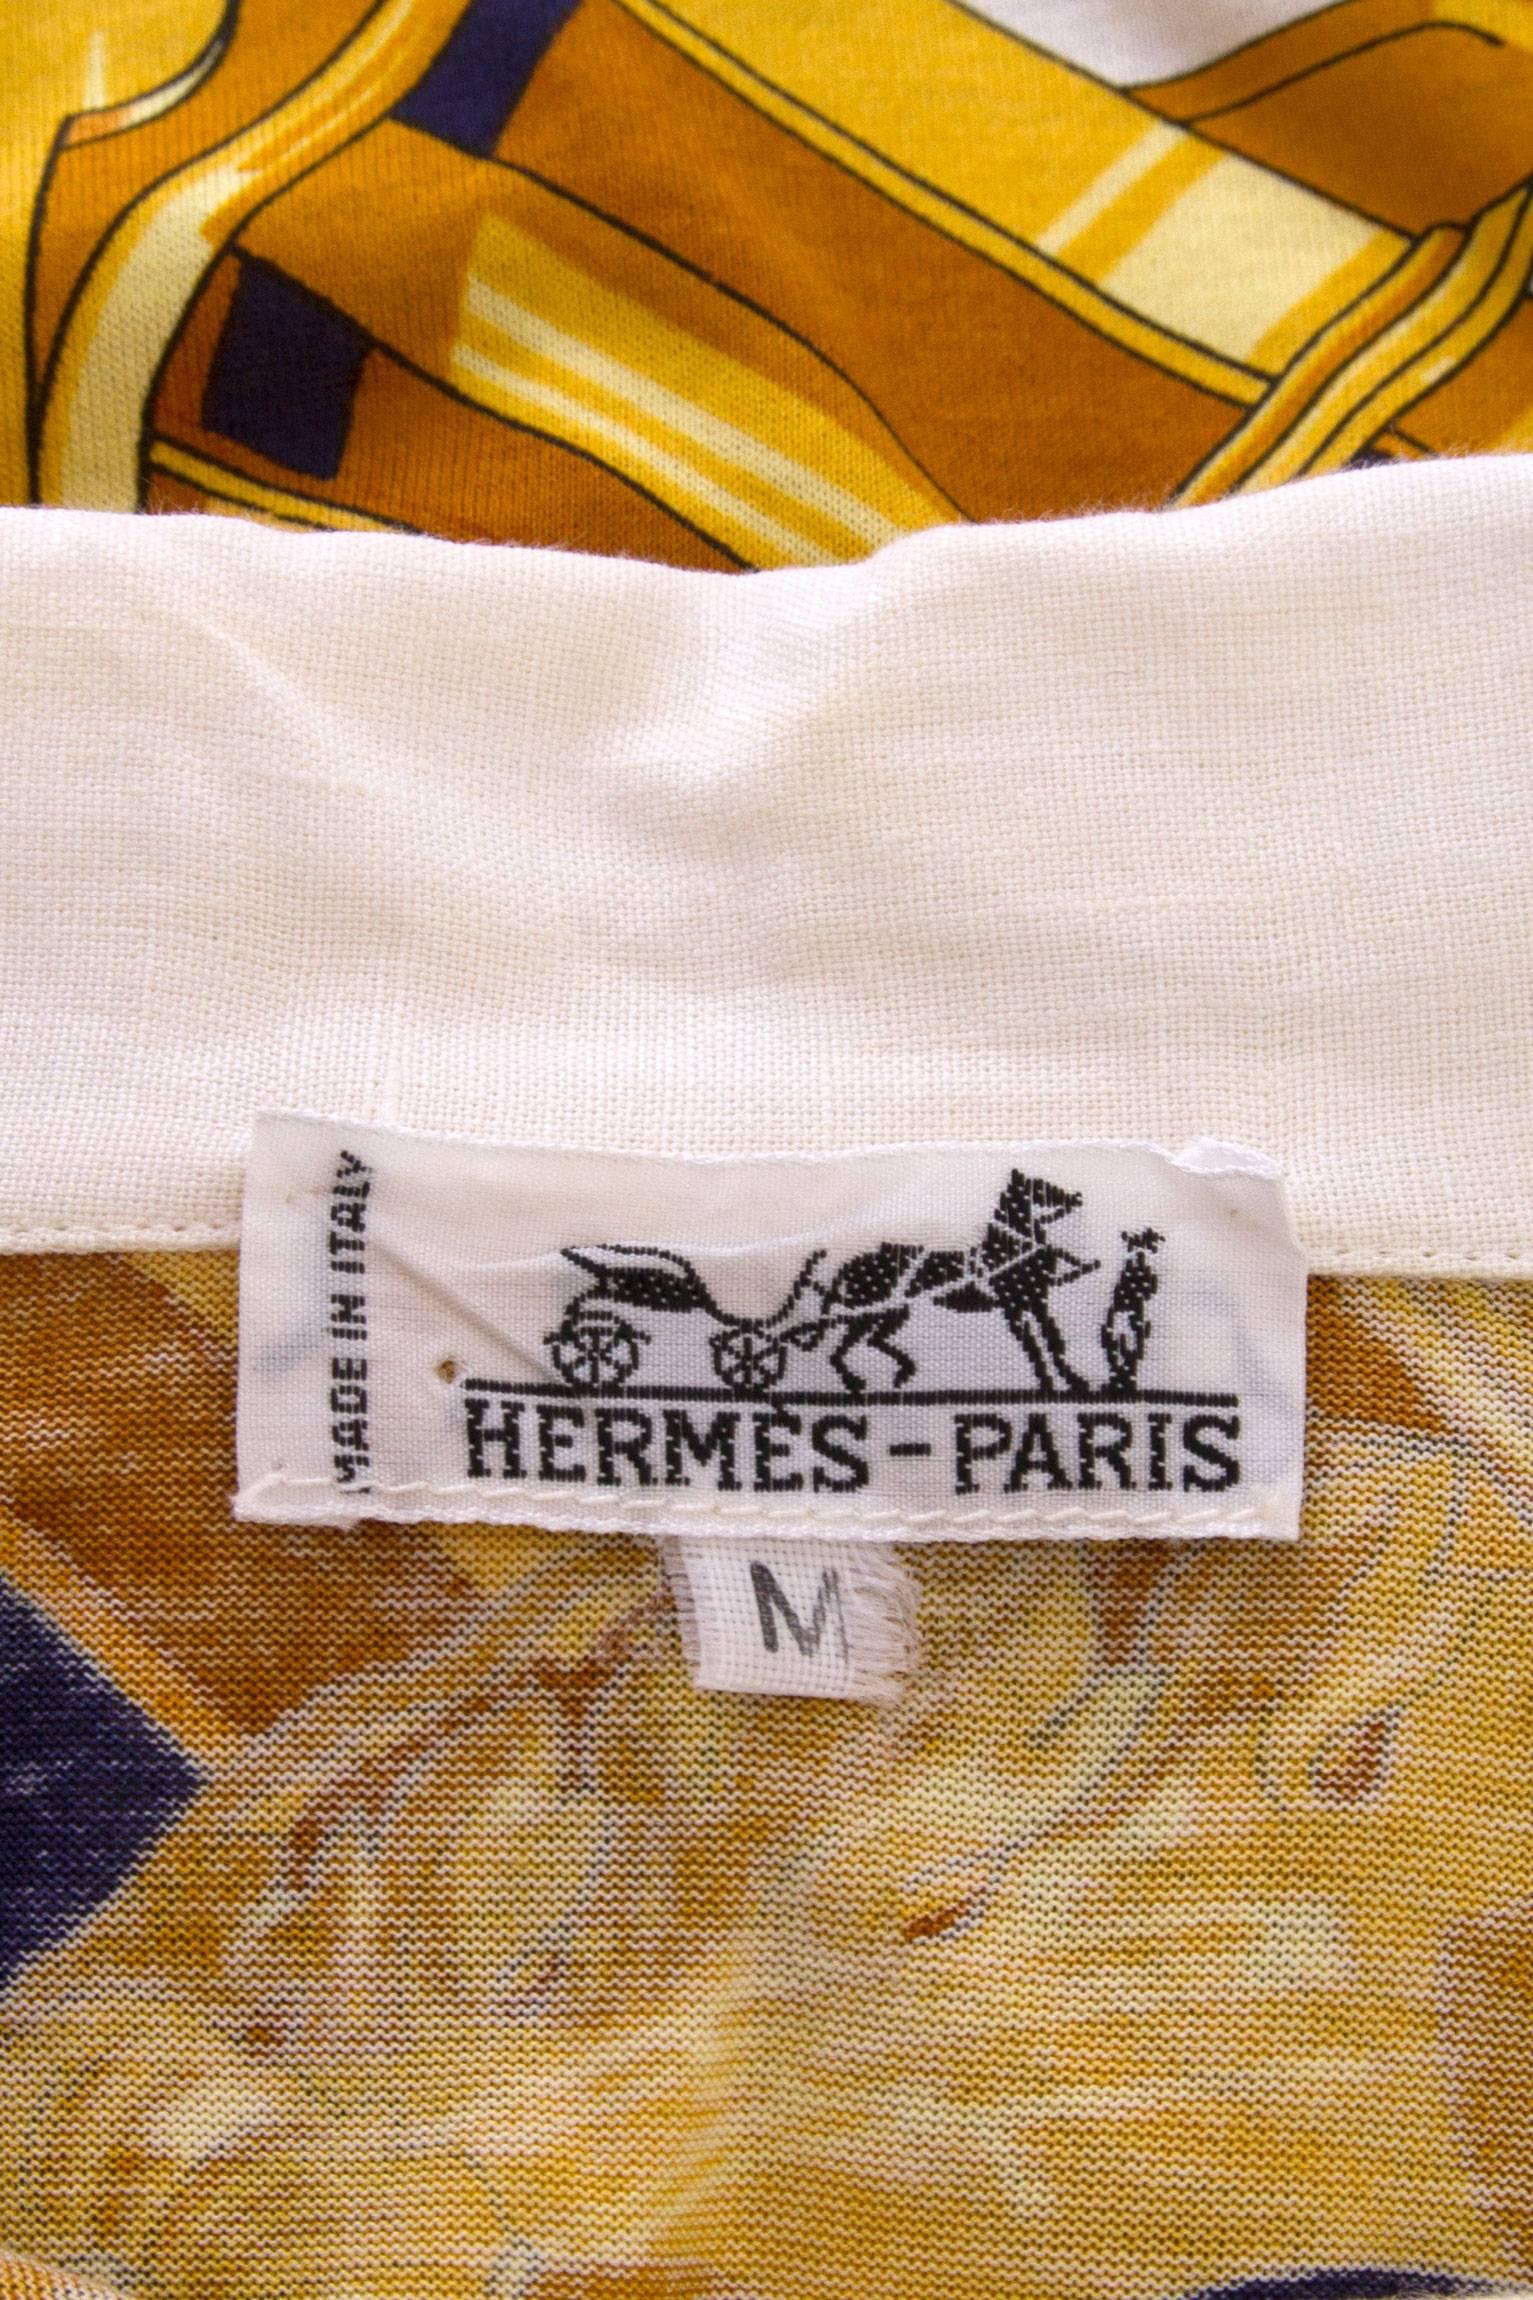 A 1980s printed Hermès cotton t-shirt with a contrasting white button up collar and short sleeves. The intricate print is held in bright yellow and navy tones, whilst a contrasting printed trim runs along the hem. The title ‘Rythmes’ is printed on